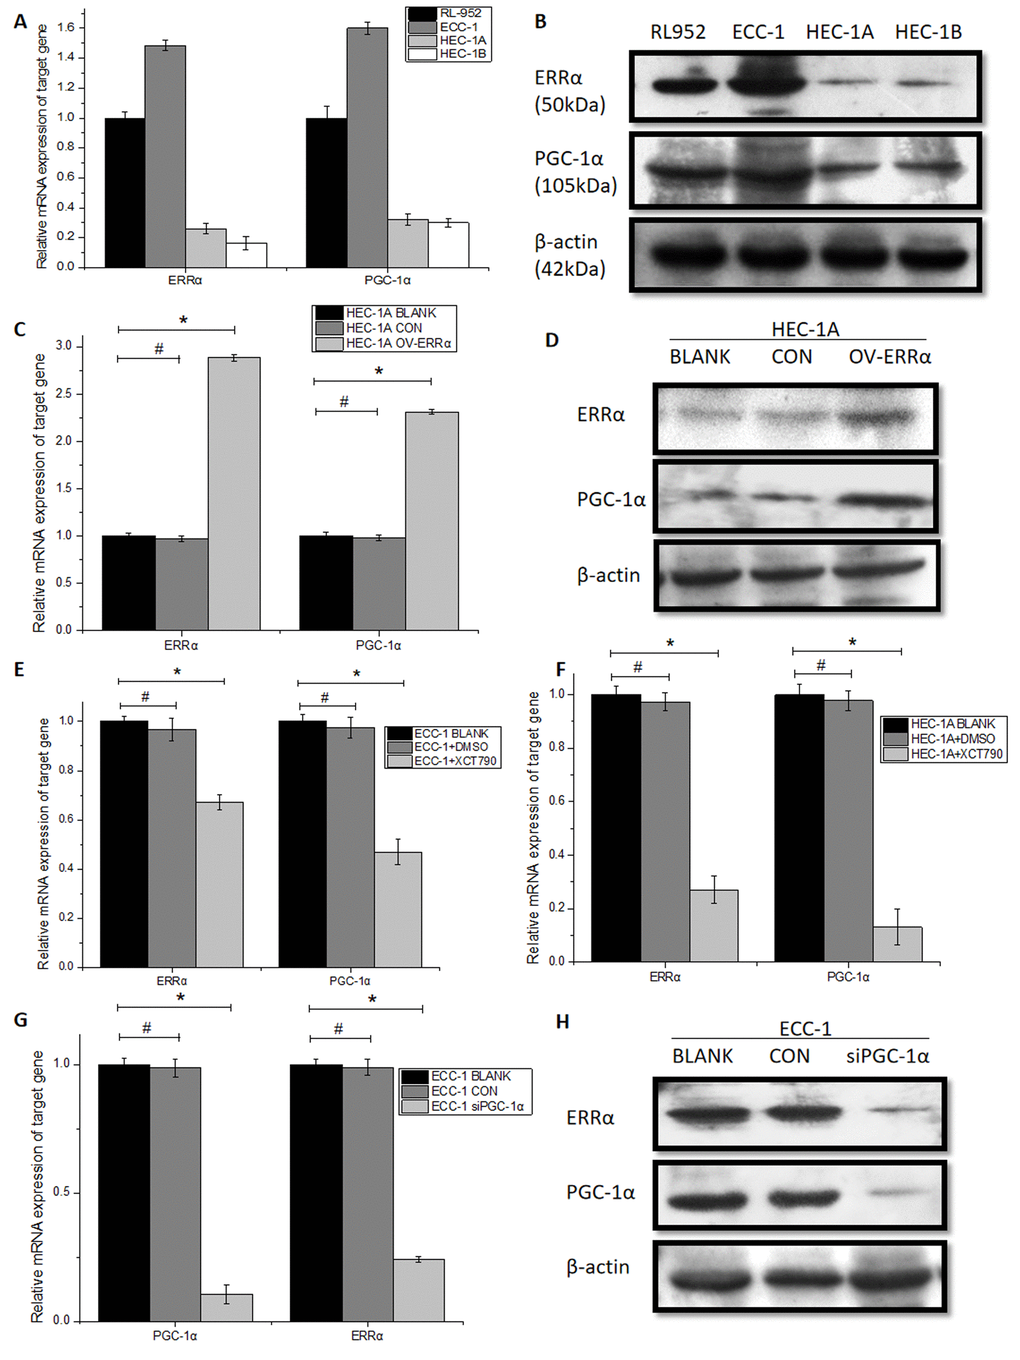 Expression of PGC-1α and ERRα in endometrial cancer cells. (A) related mRNA expression and (B) protein expression pattern of PGC-1α and ERRα in RL-952, ECC-1, HEC-1A and HEC-1B endometrial cancer cells. (C) PGC-1α and ERRα mRNA expression and (D) protein levels was significantly up-regulated after the infection with lentivirus targeted on OV-ERRα. Relative mRNA expression in ECC-1 (E) and HEC-1A (F) cells treated with XCT790 showed a downregulation of ERRα. (G) PGC-1α and ERRα mRNA expression (H) protein levels was significantly down-regulated after the infection with PGC-1α-siRNA, ERRα is consistent with PGC-1α regulation. Relative mRNA expression of PGC-1α is consistent with ERRα regulation. *mean P0.05.